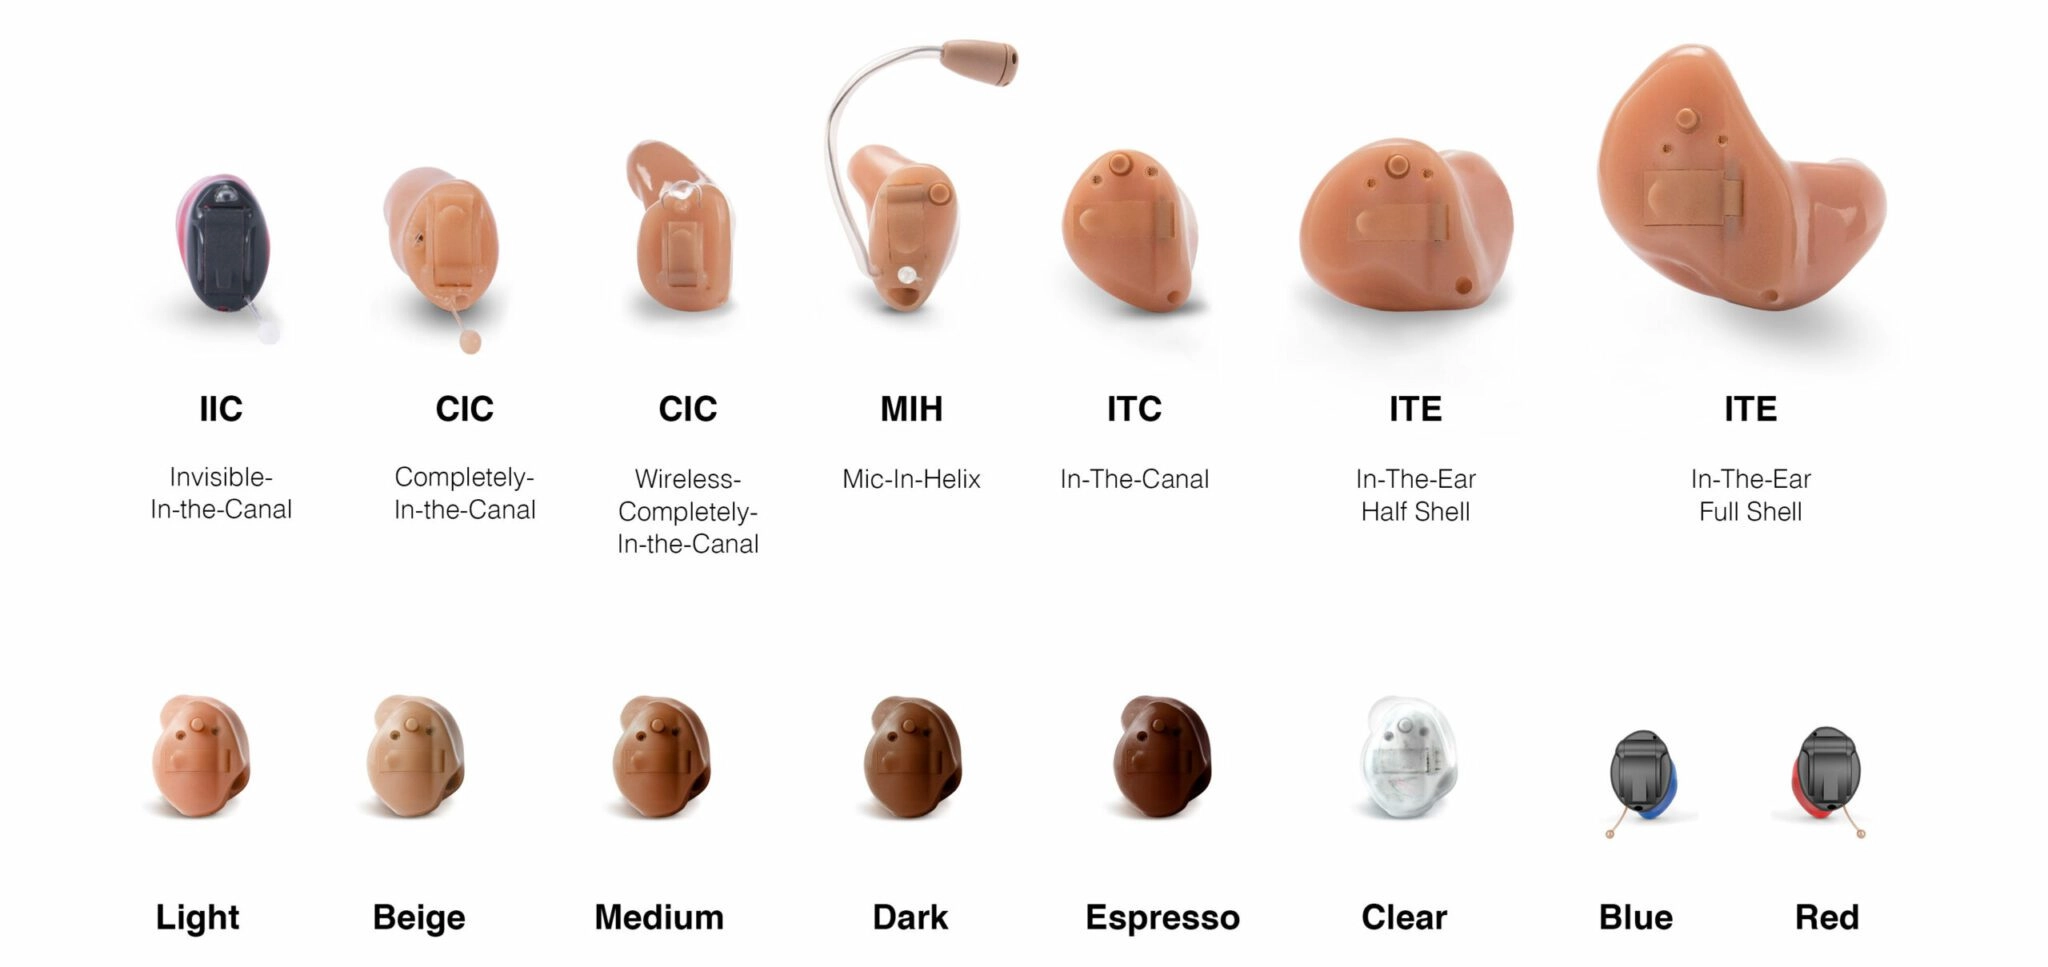 Image Showing different styles of hearing aids